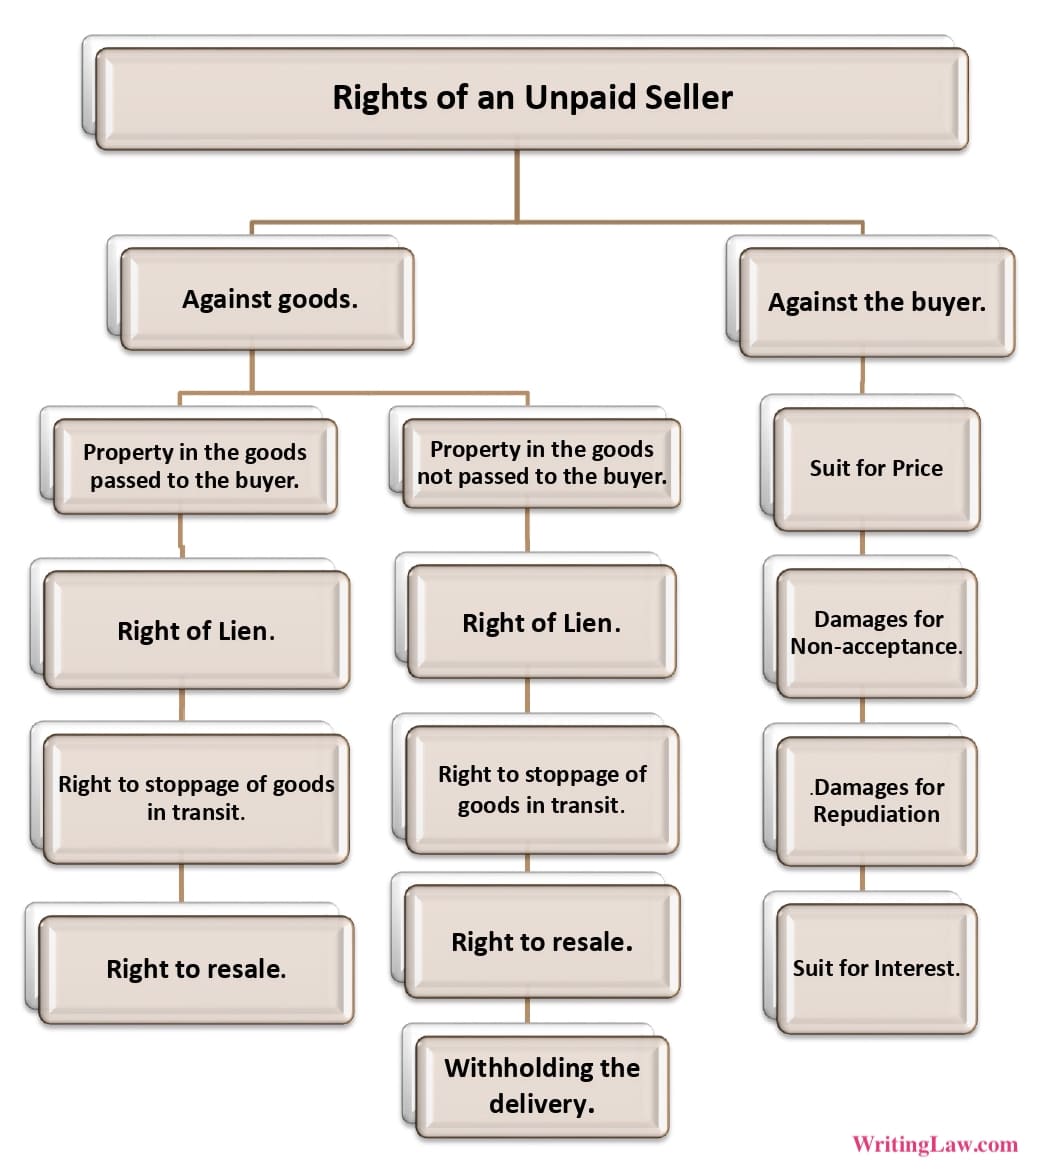 Chart showing the rights of an unpaid seller